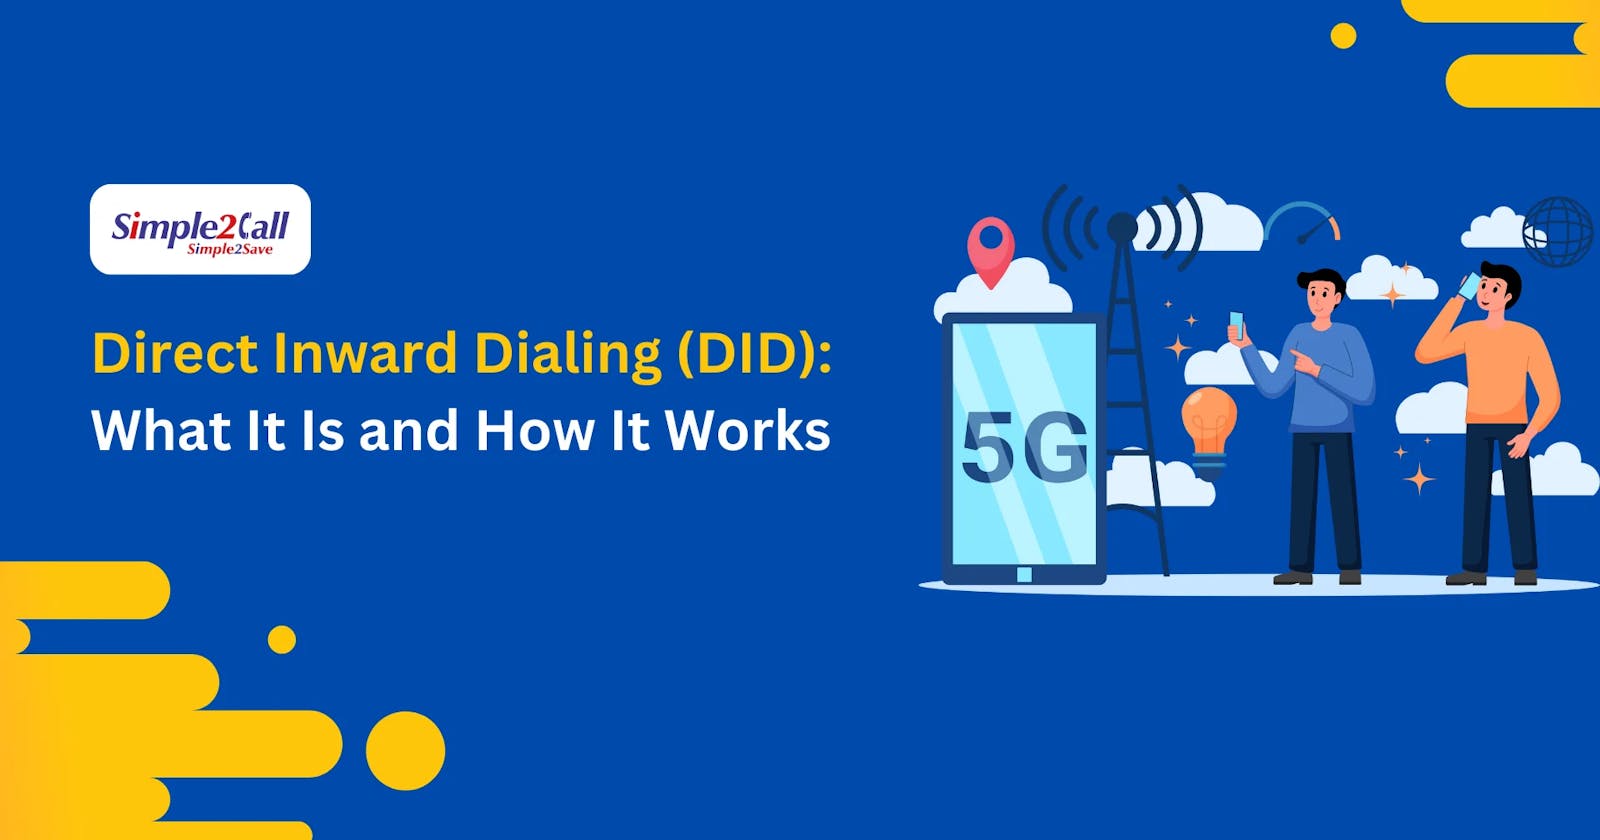 Direct Inward Dialling (DID): What it is and how it works